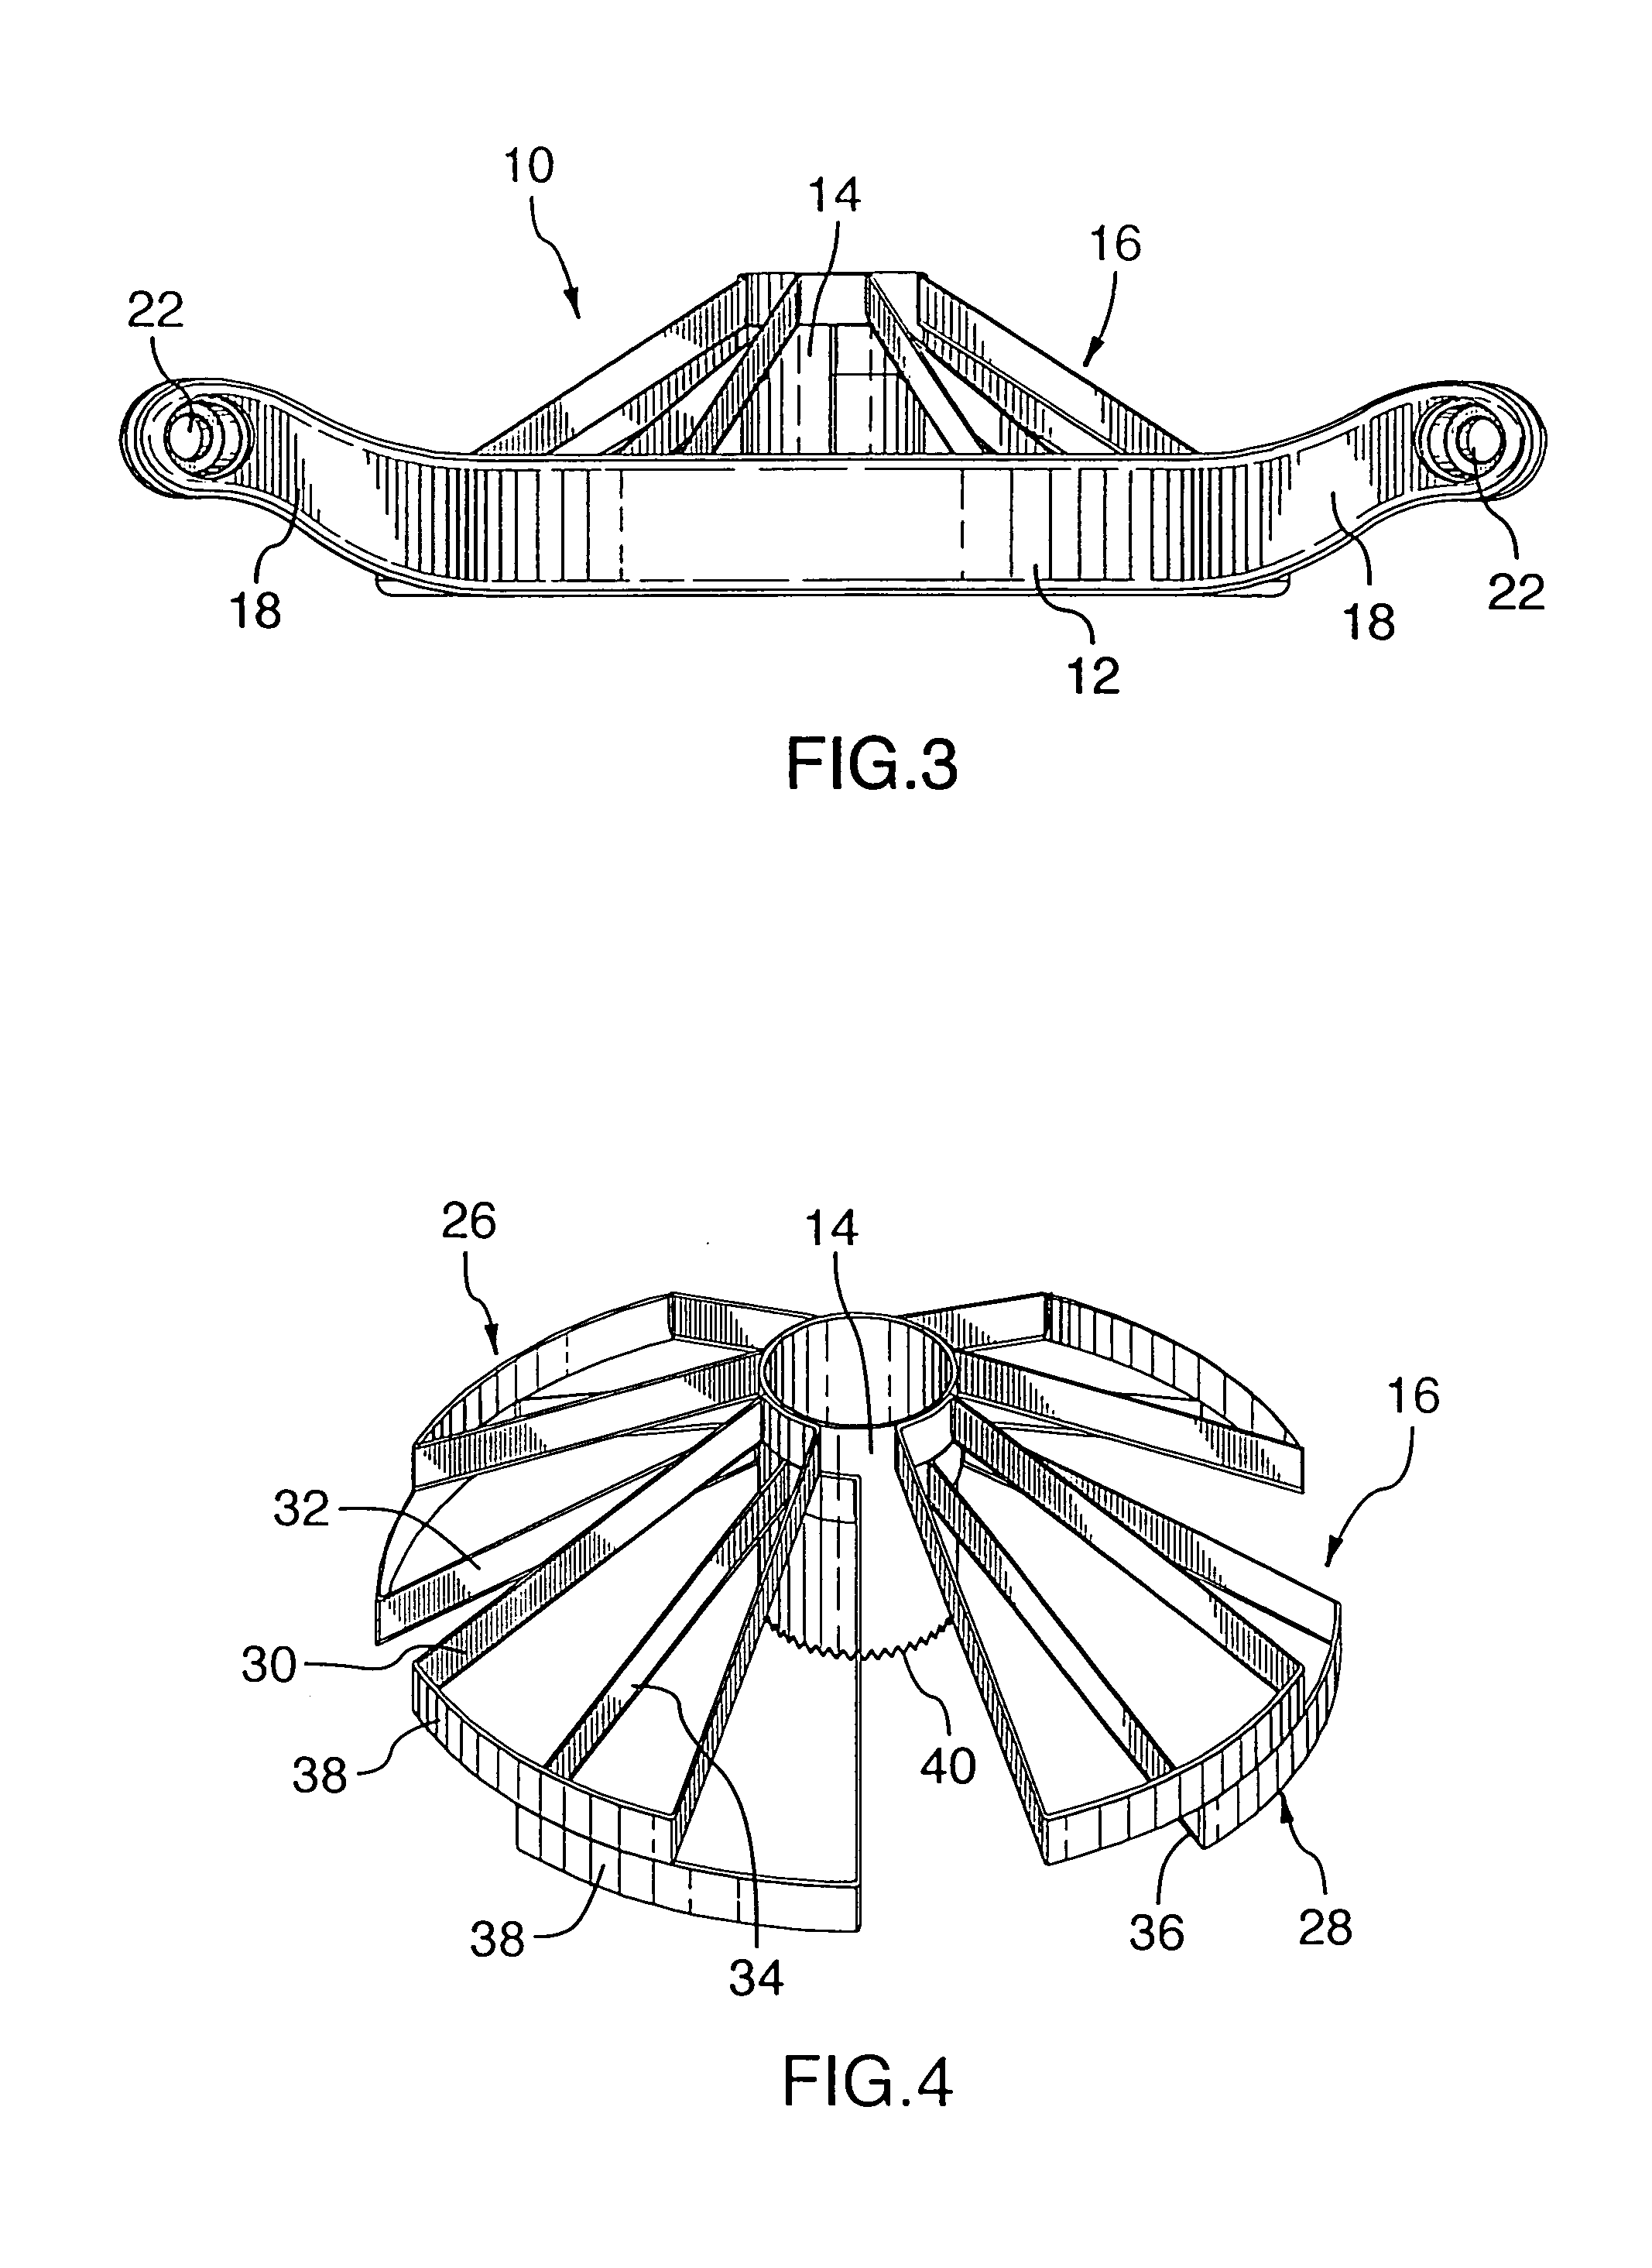 Apparatus for coring into and cutting food items